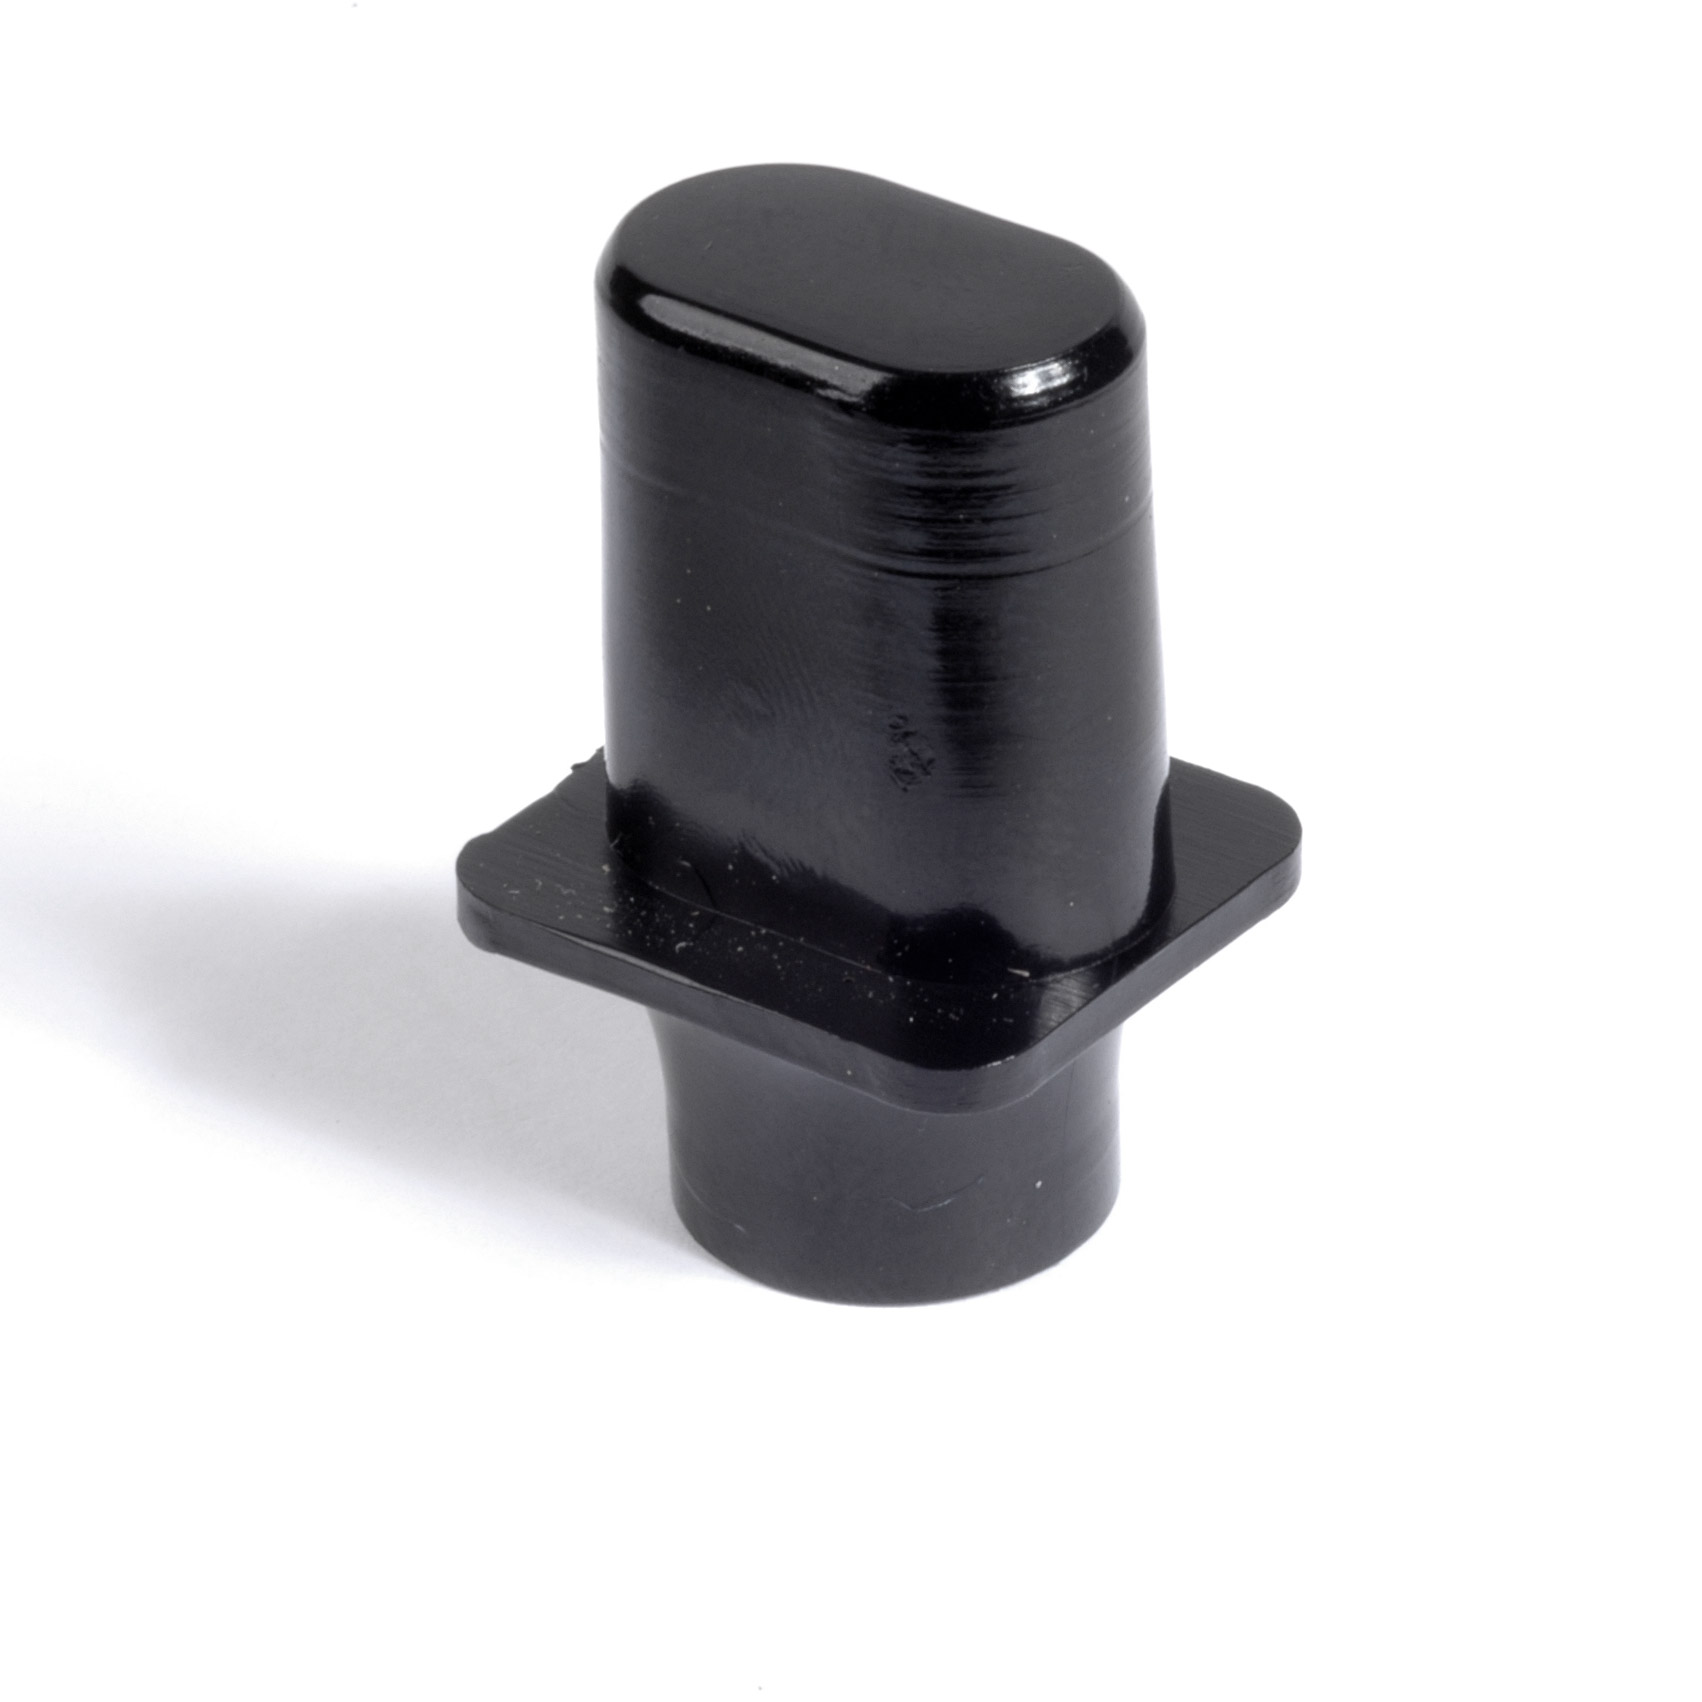 Top-hat Switch Knob for Tele